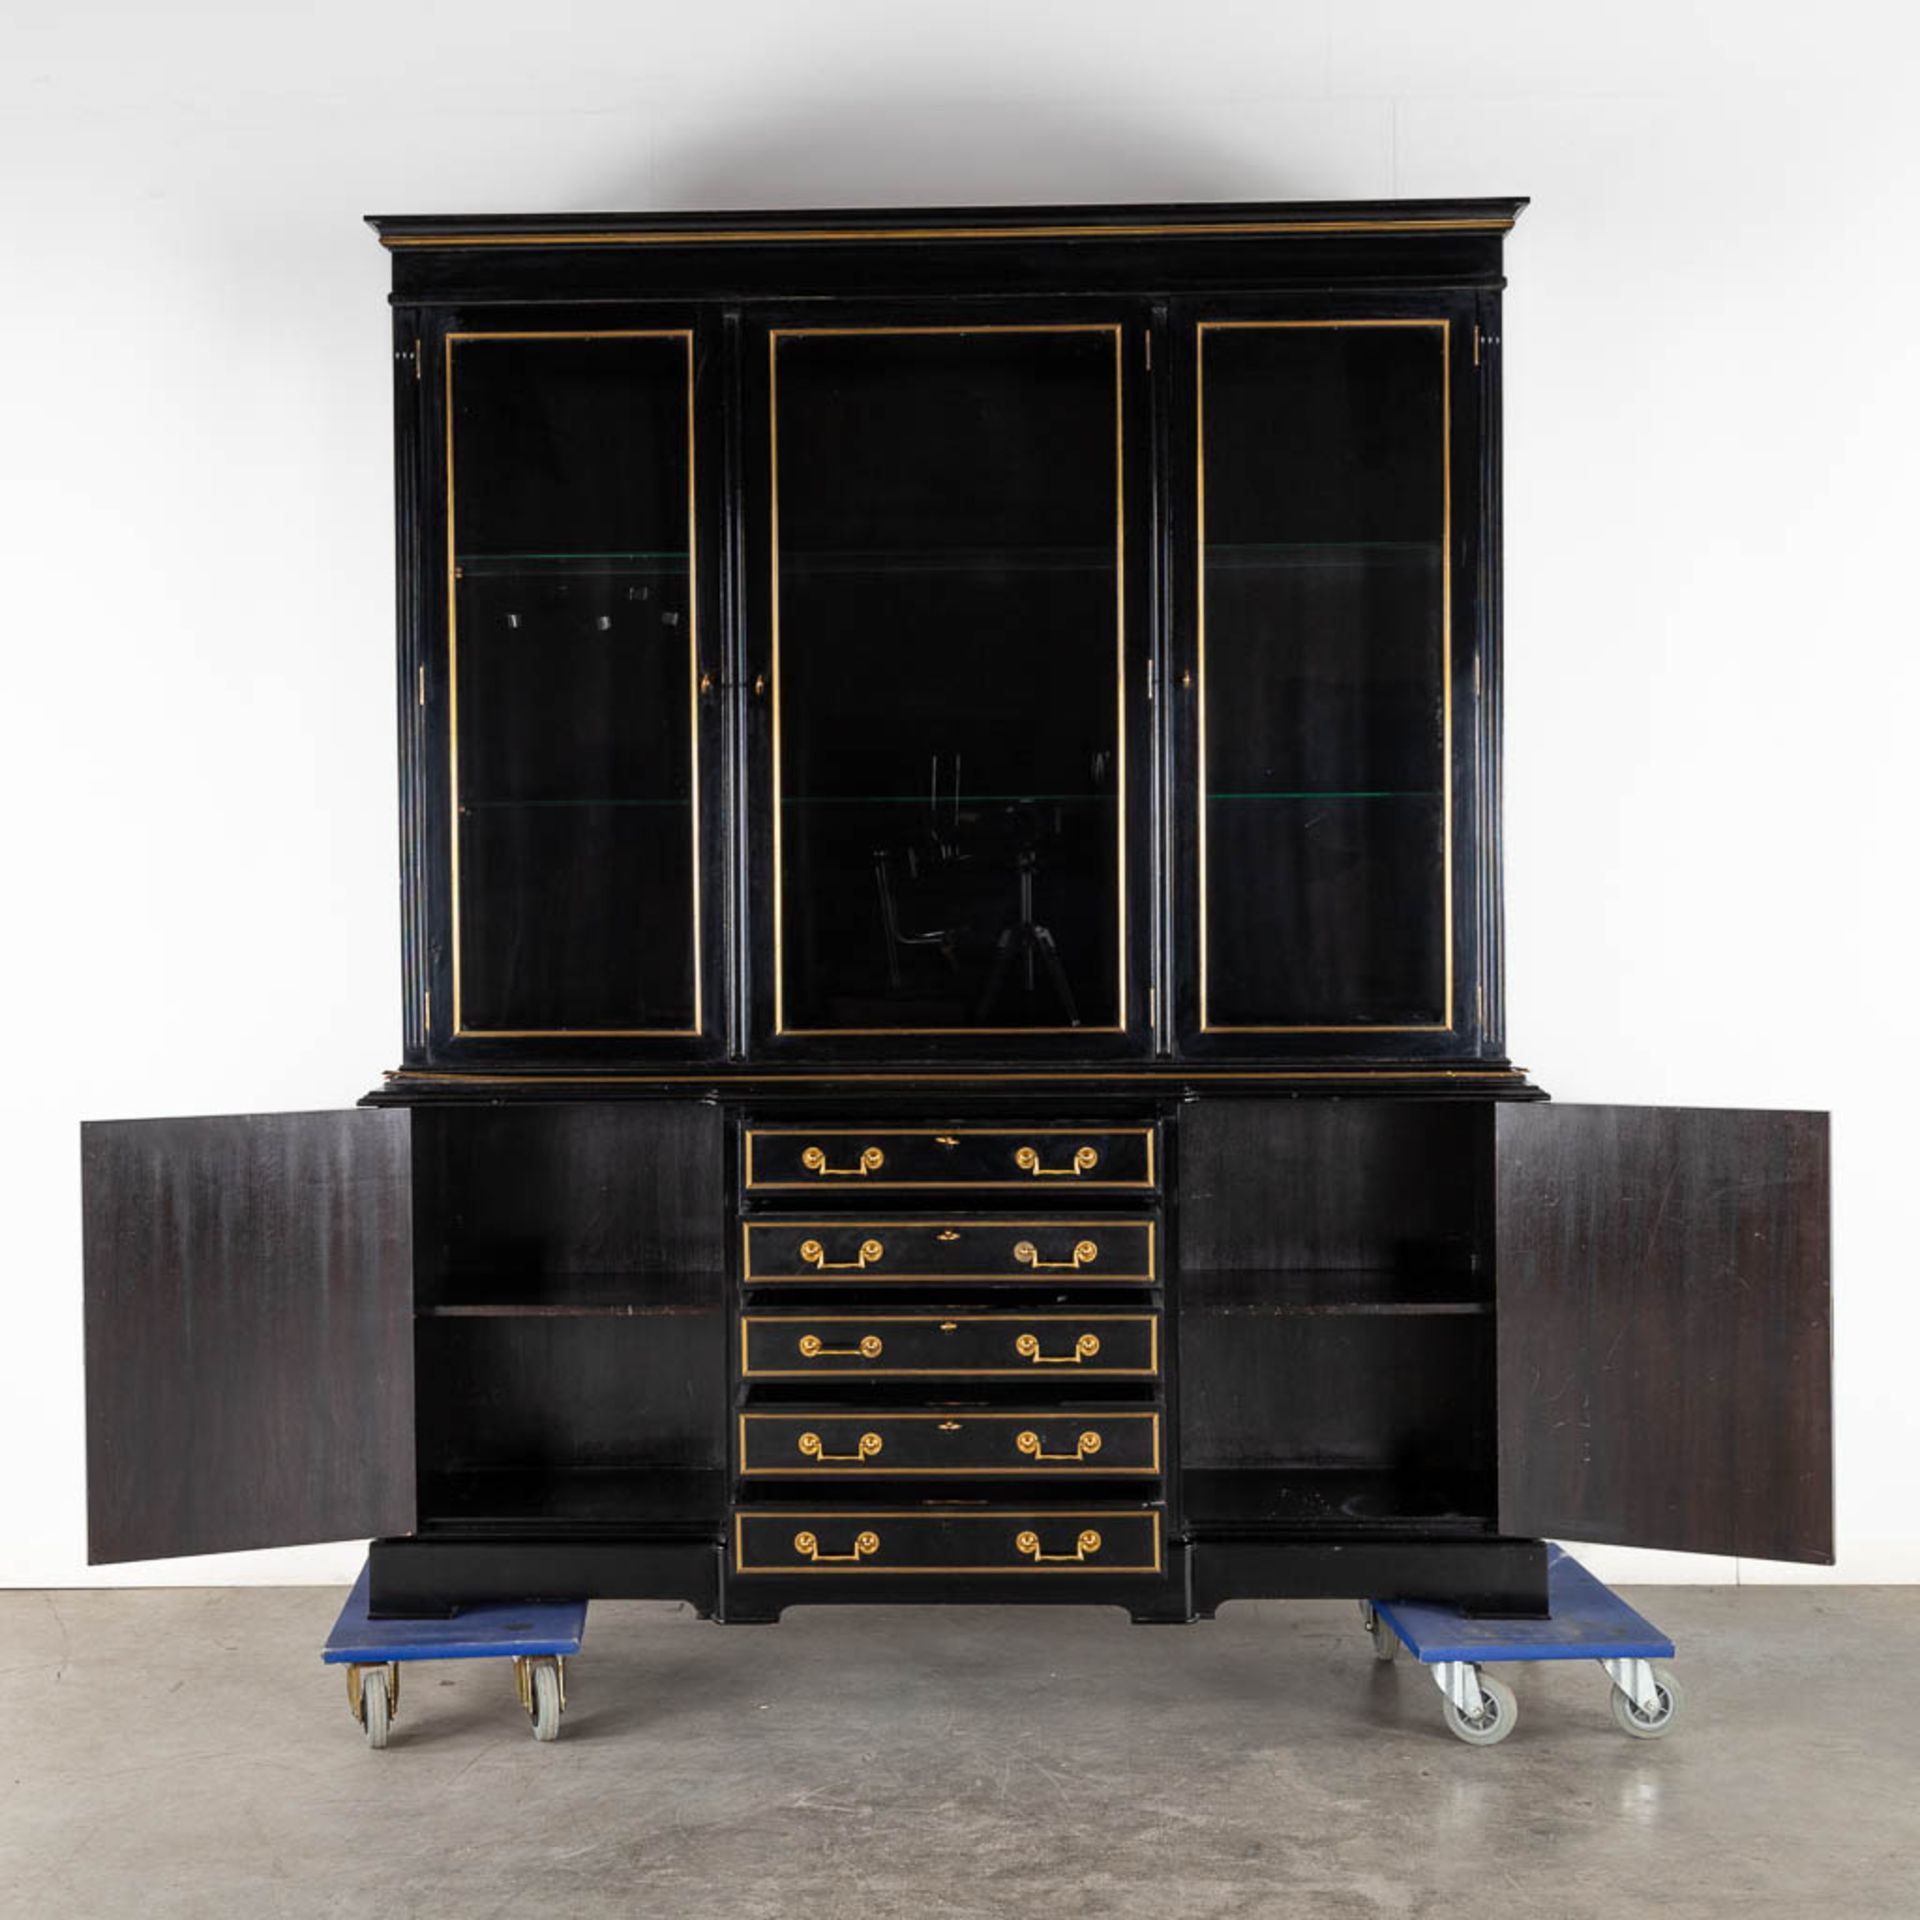 A black lacquered bookcase with gilt hardware. 20th C. (D:42 x W:167 x H:198 cm) - Image 4 of 13